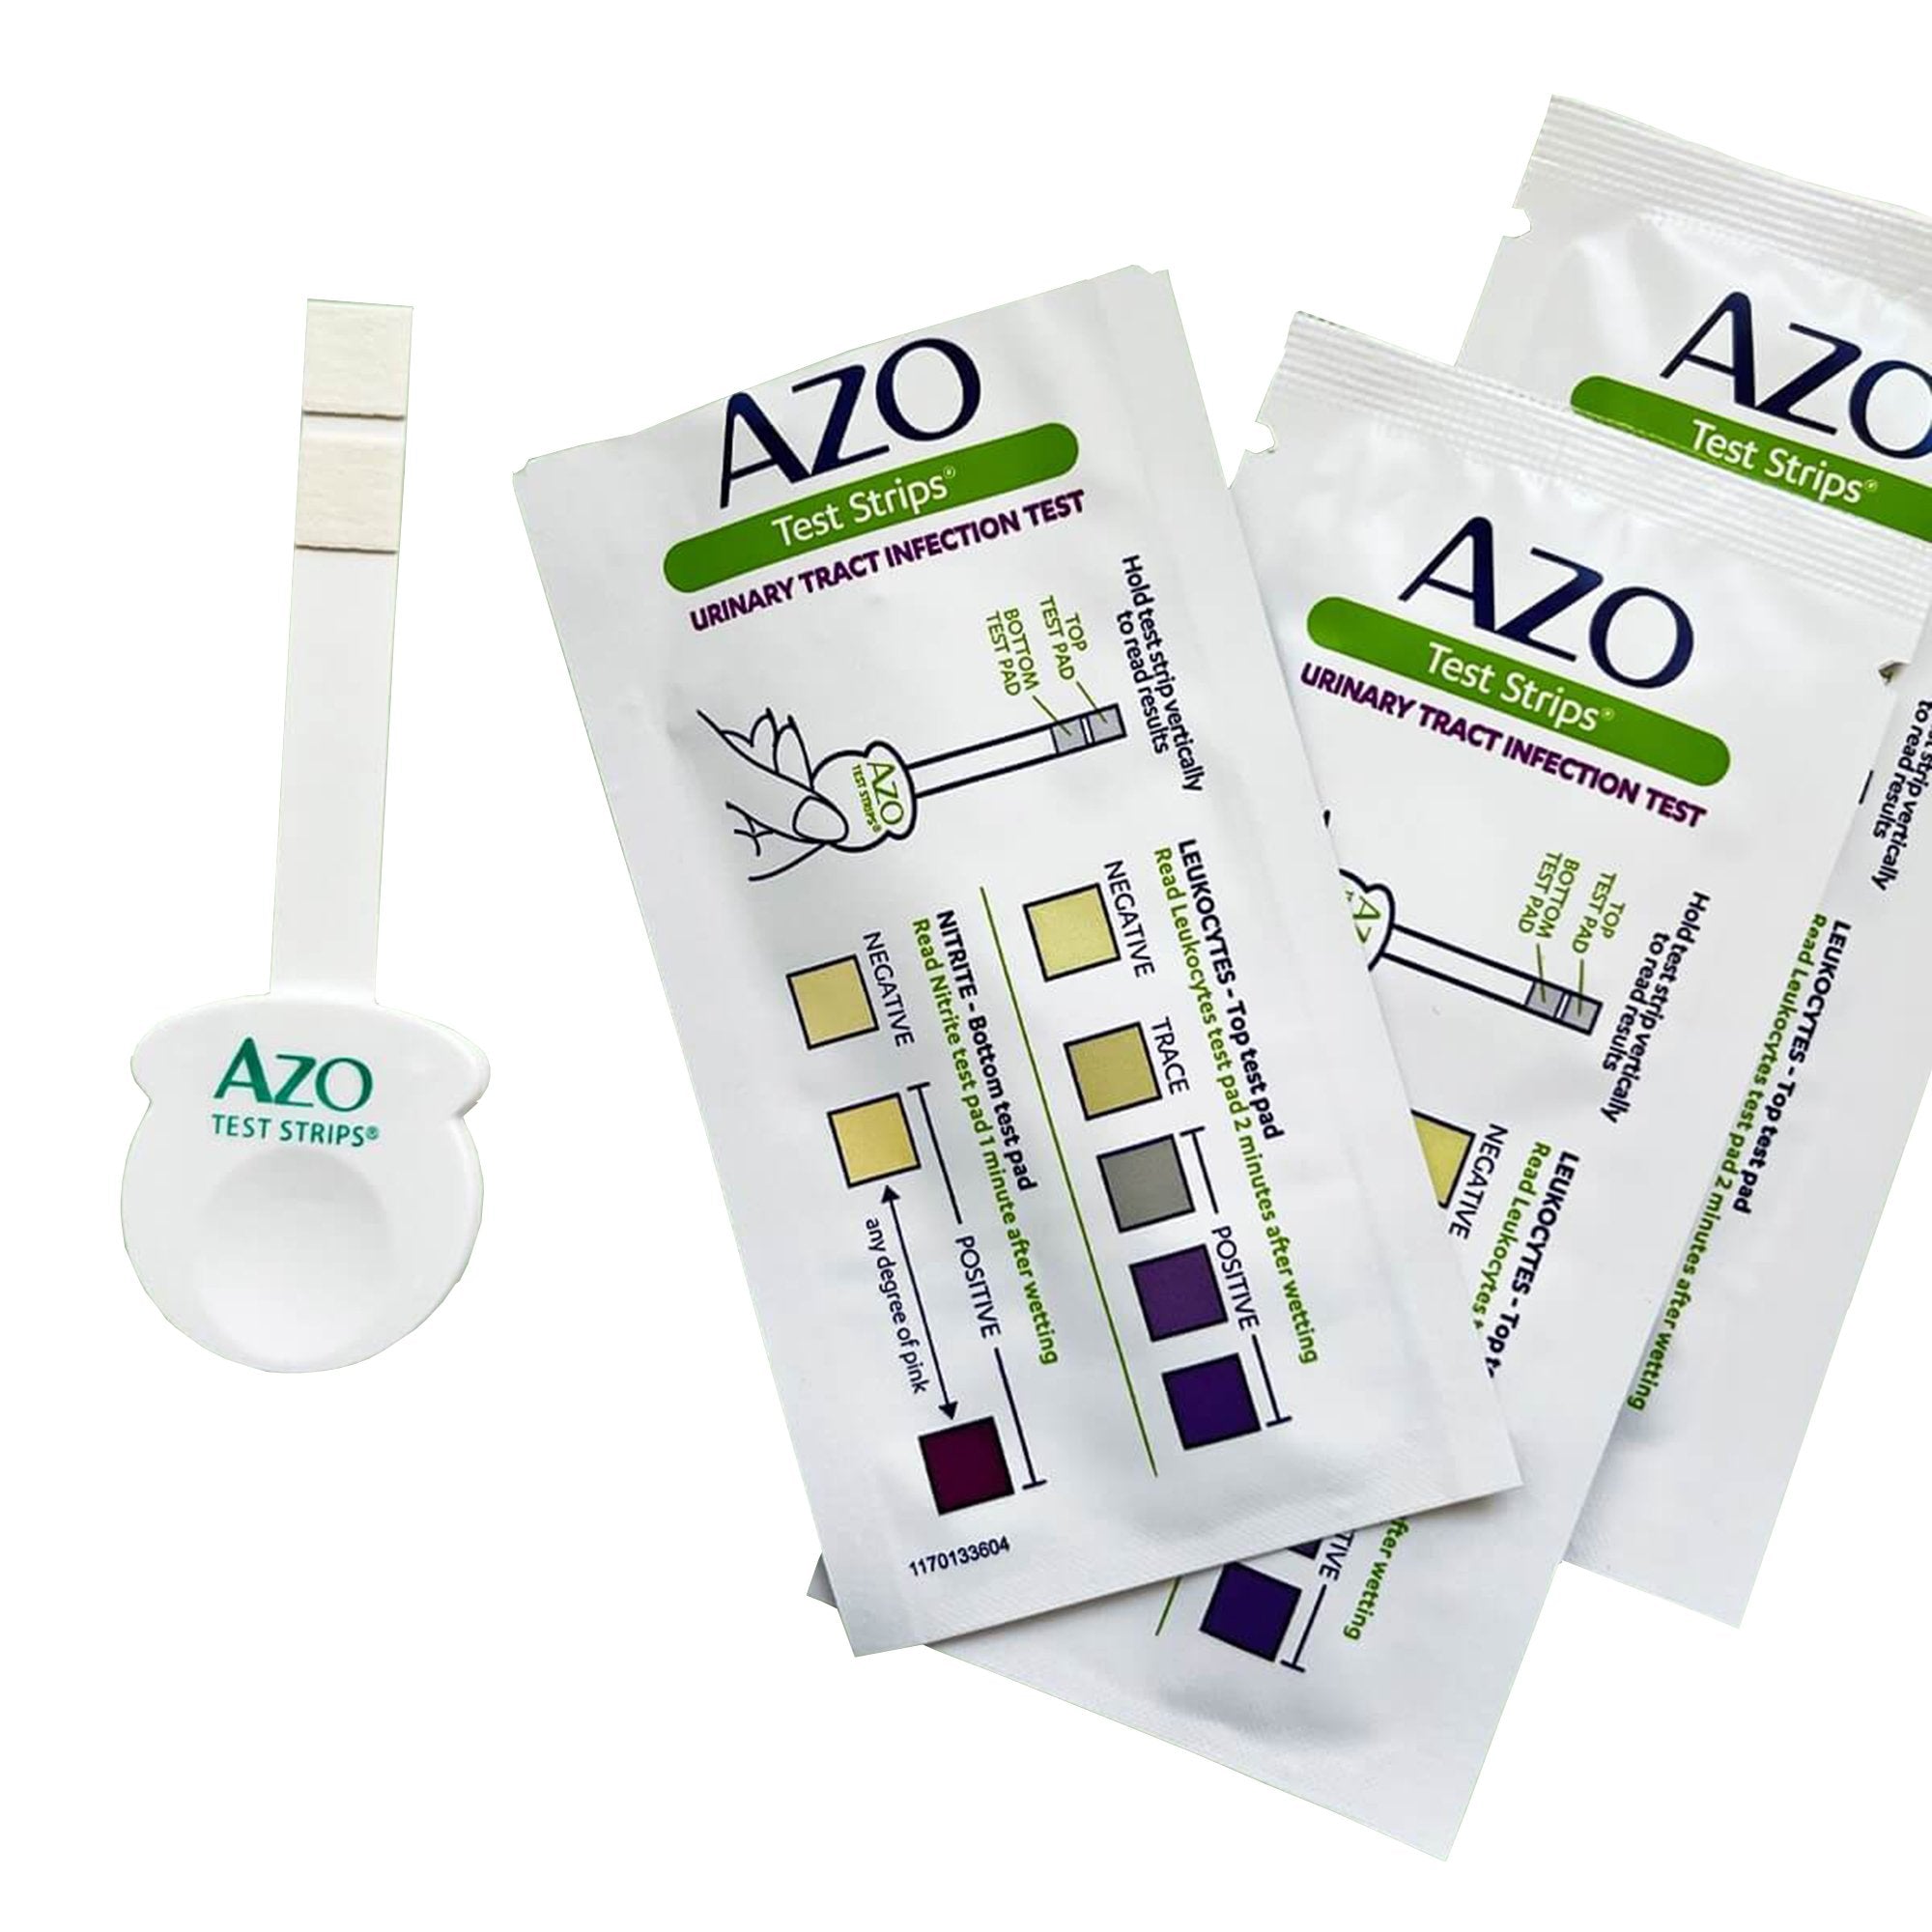 Urinalysis Test Kit AZO Test Strips Home Test Device Urinary Tract Infection Detection Urine Sample 3 Tests CLIA Waived